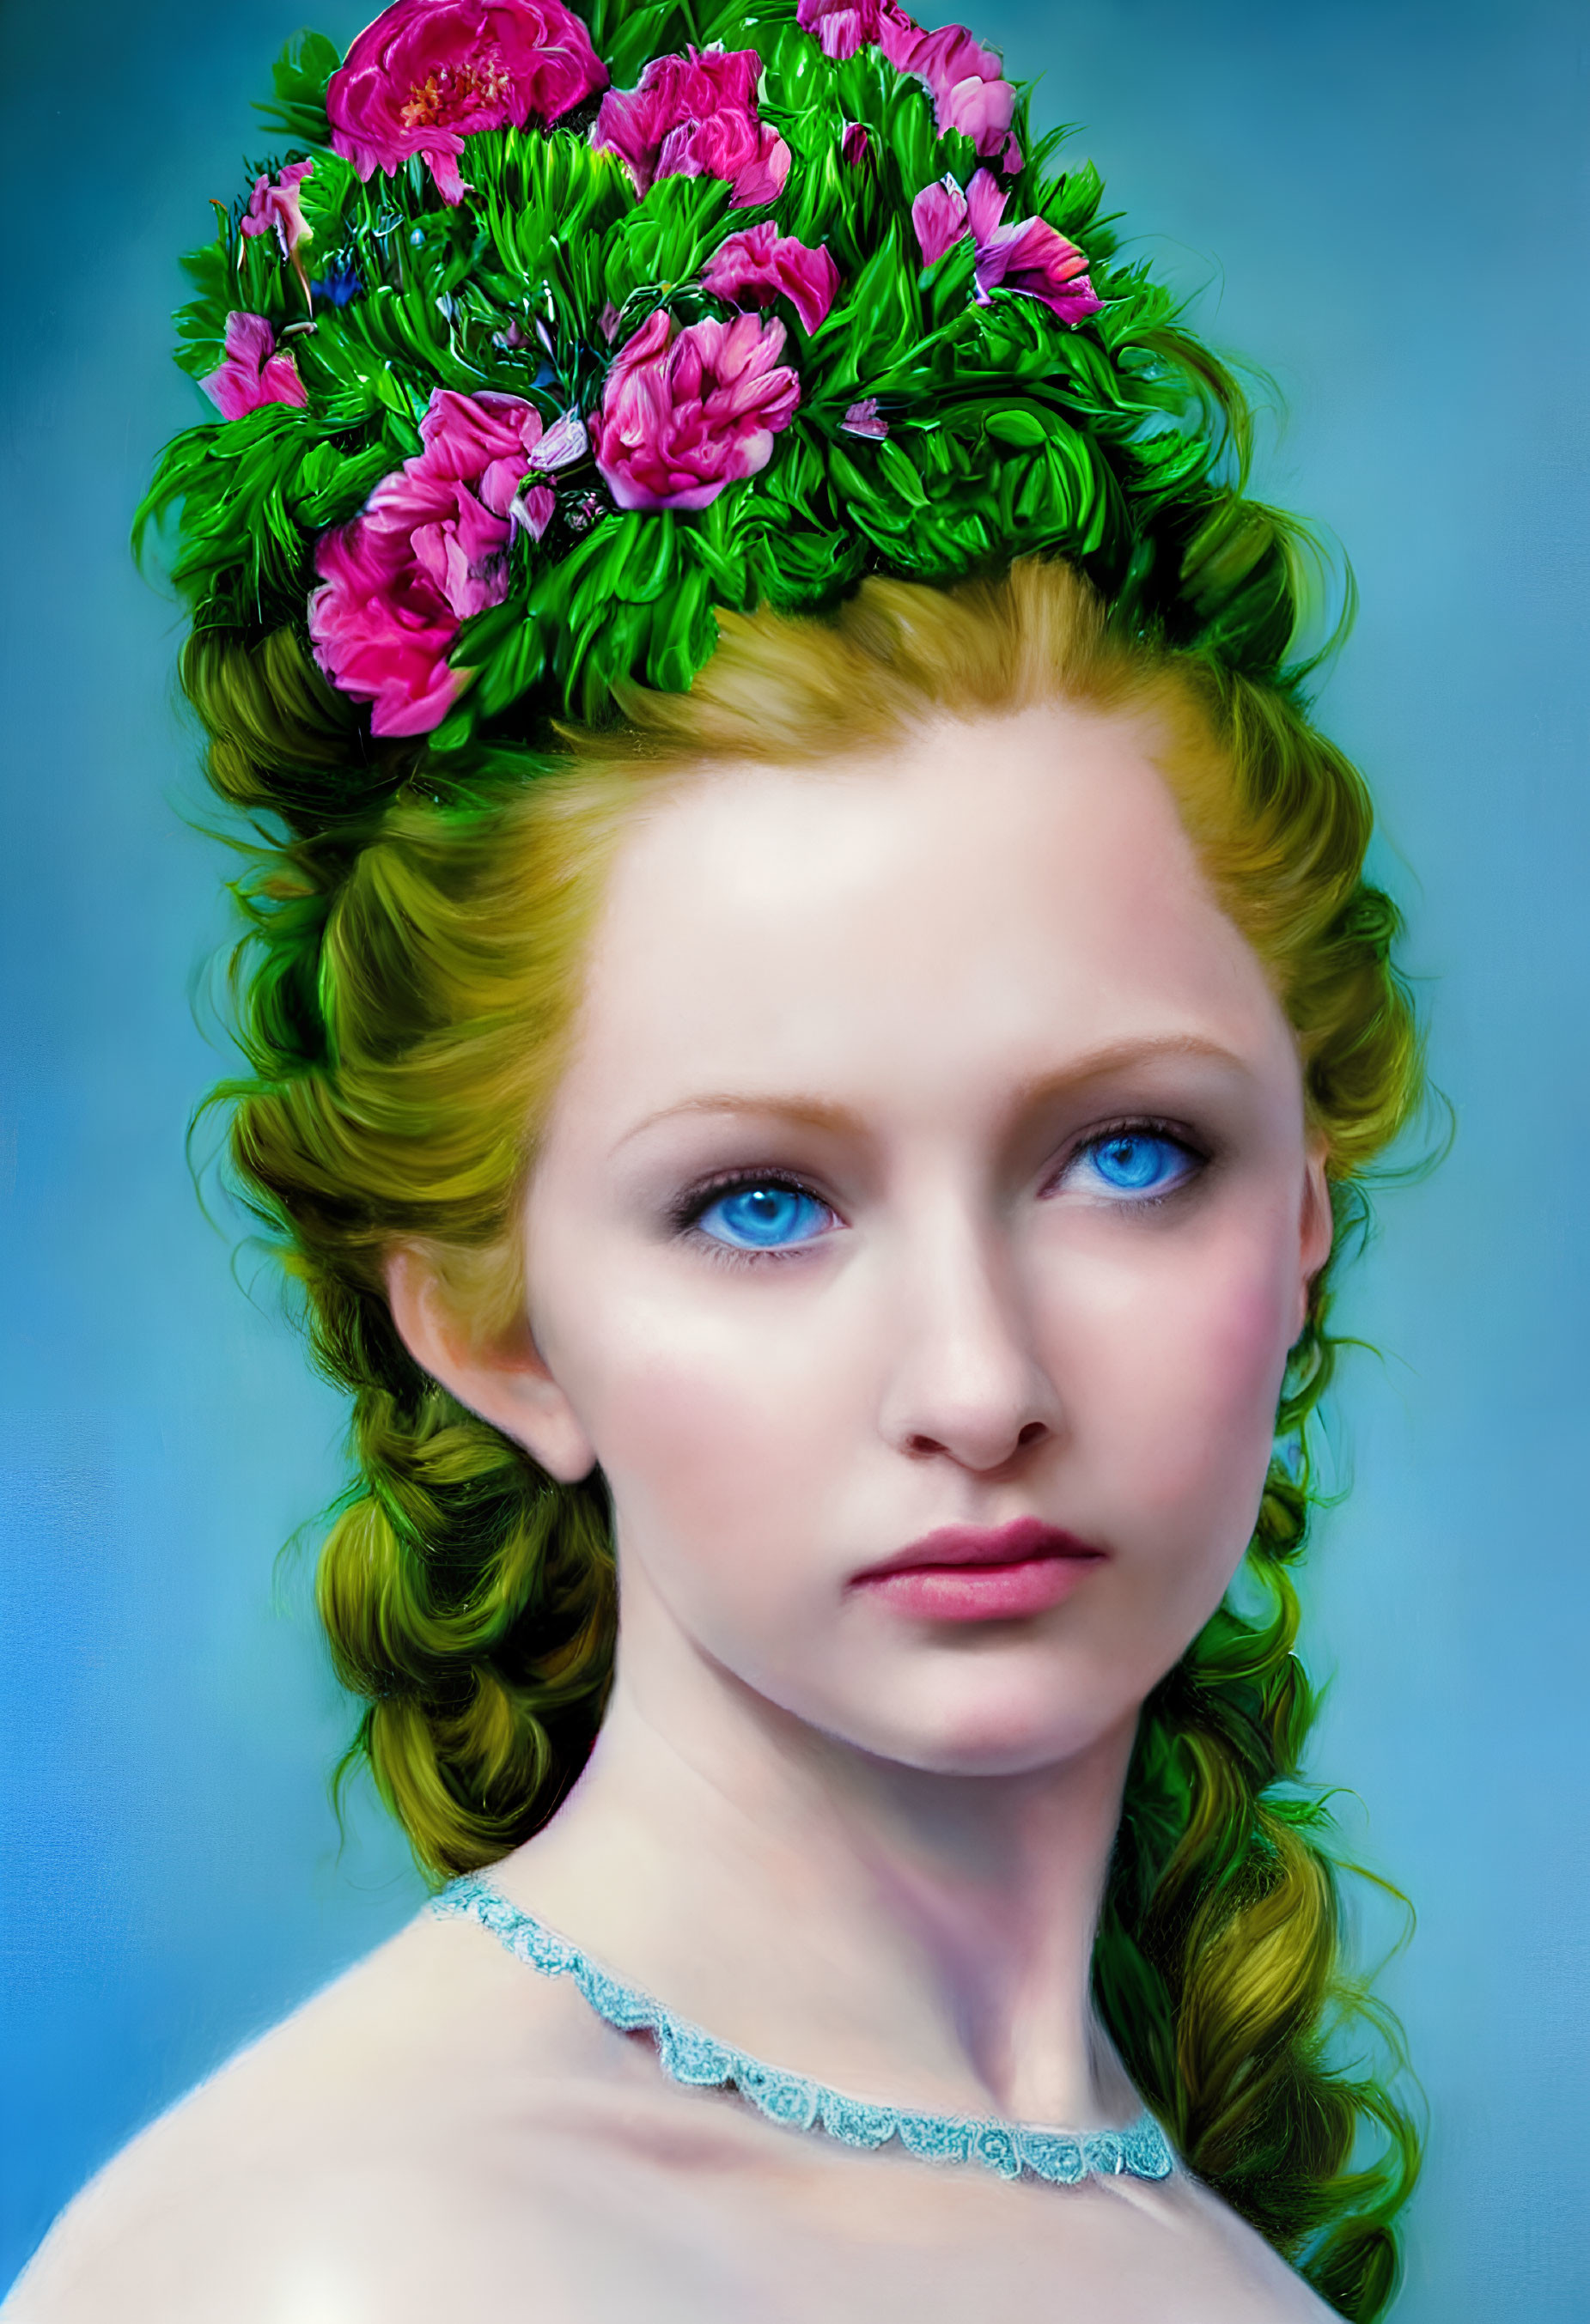 Illustration: Woman with Blue Eyes, Green Hair, and Pink Flowers